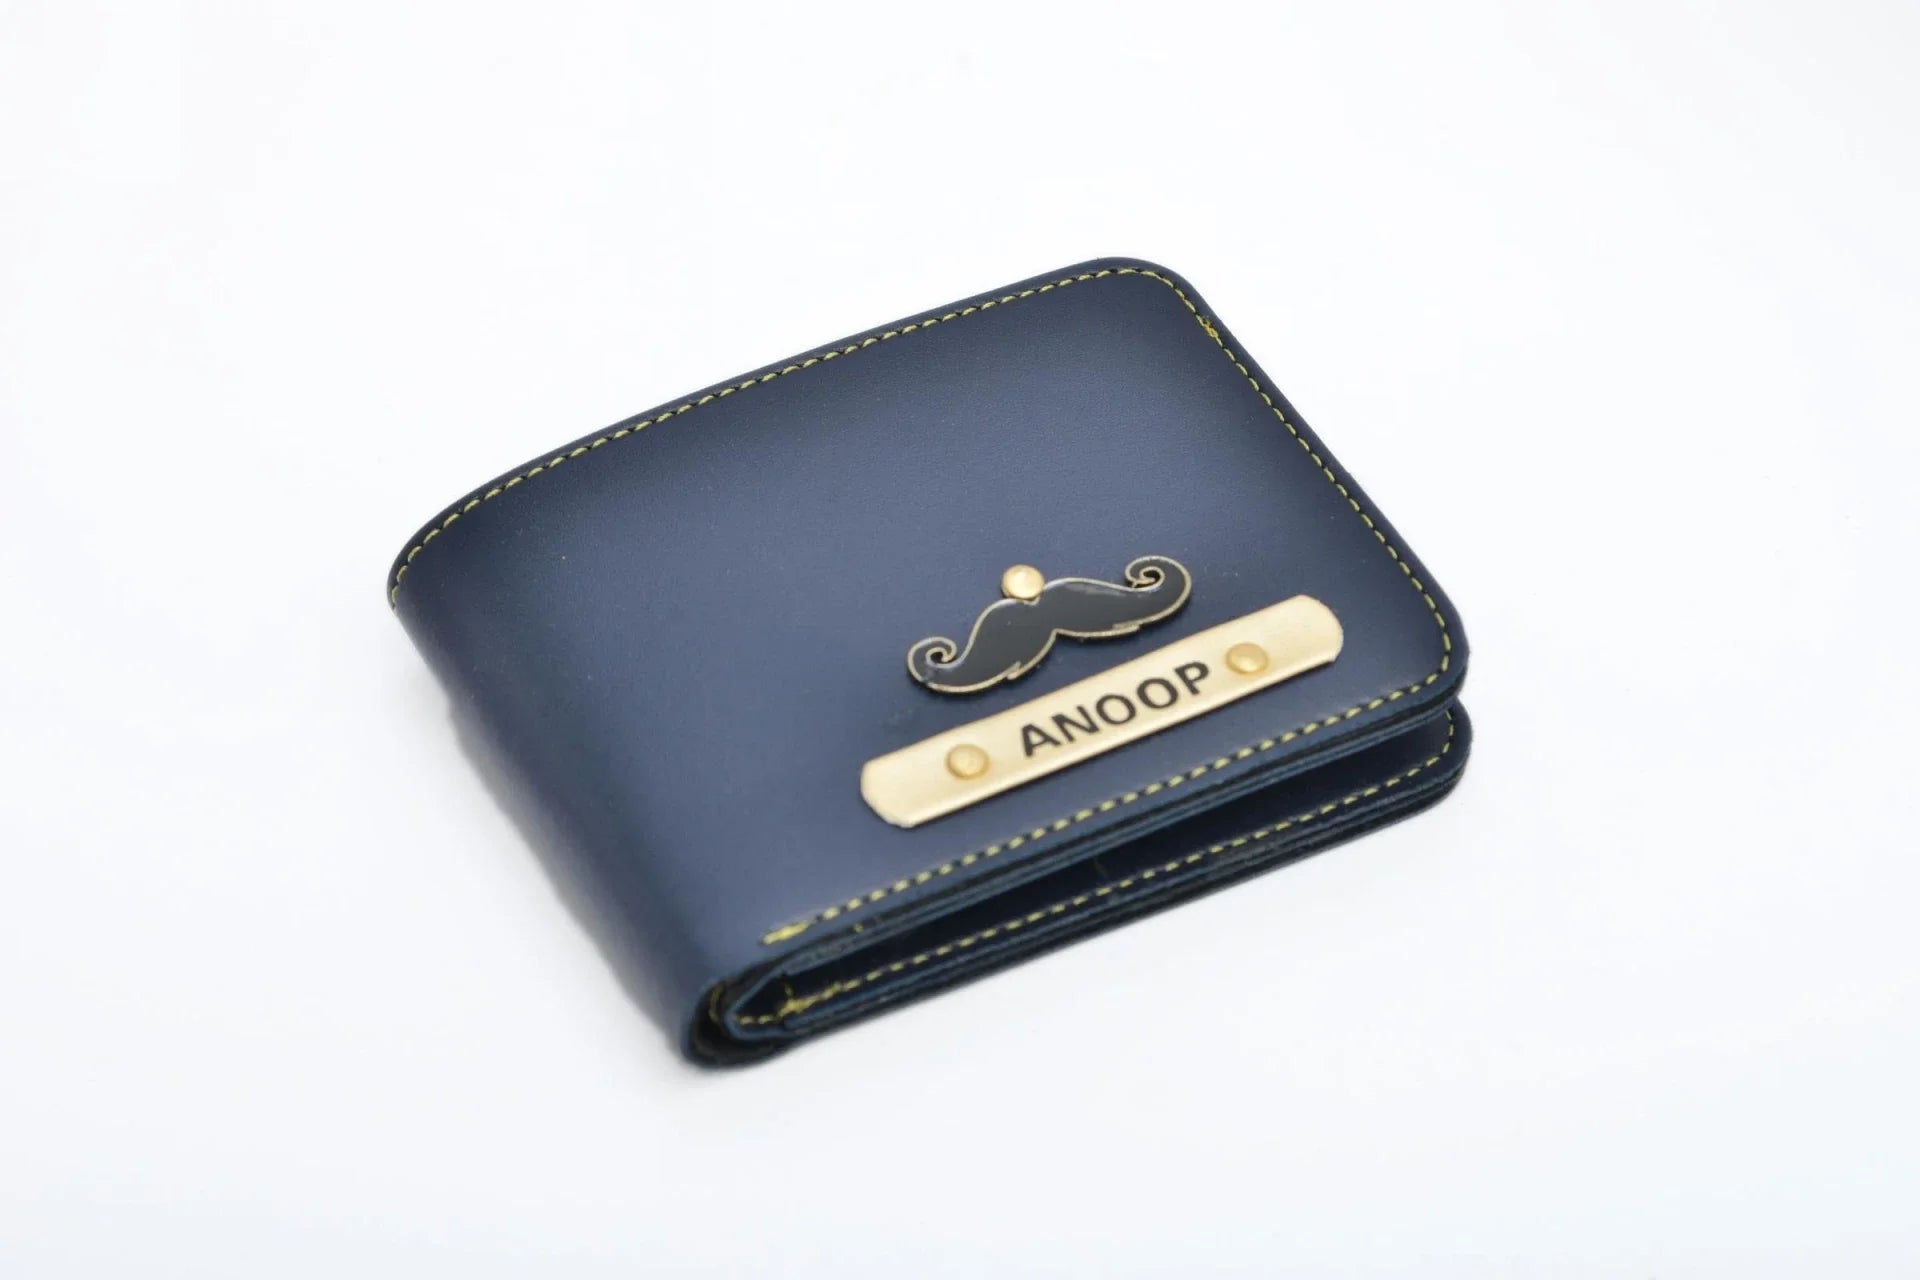 personalized-cb07-royal-blue-customized-best-gift-for-boyfriend-girlfriend. Stylish wallet made with the best quality synthetic leather is the perfect touch to any office/formal outfit. The option to customize it with your name and lucky charm makes it that much more personal and unique. This also makes for a best business gift! Always be trending and in style with our personalized wallets.